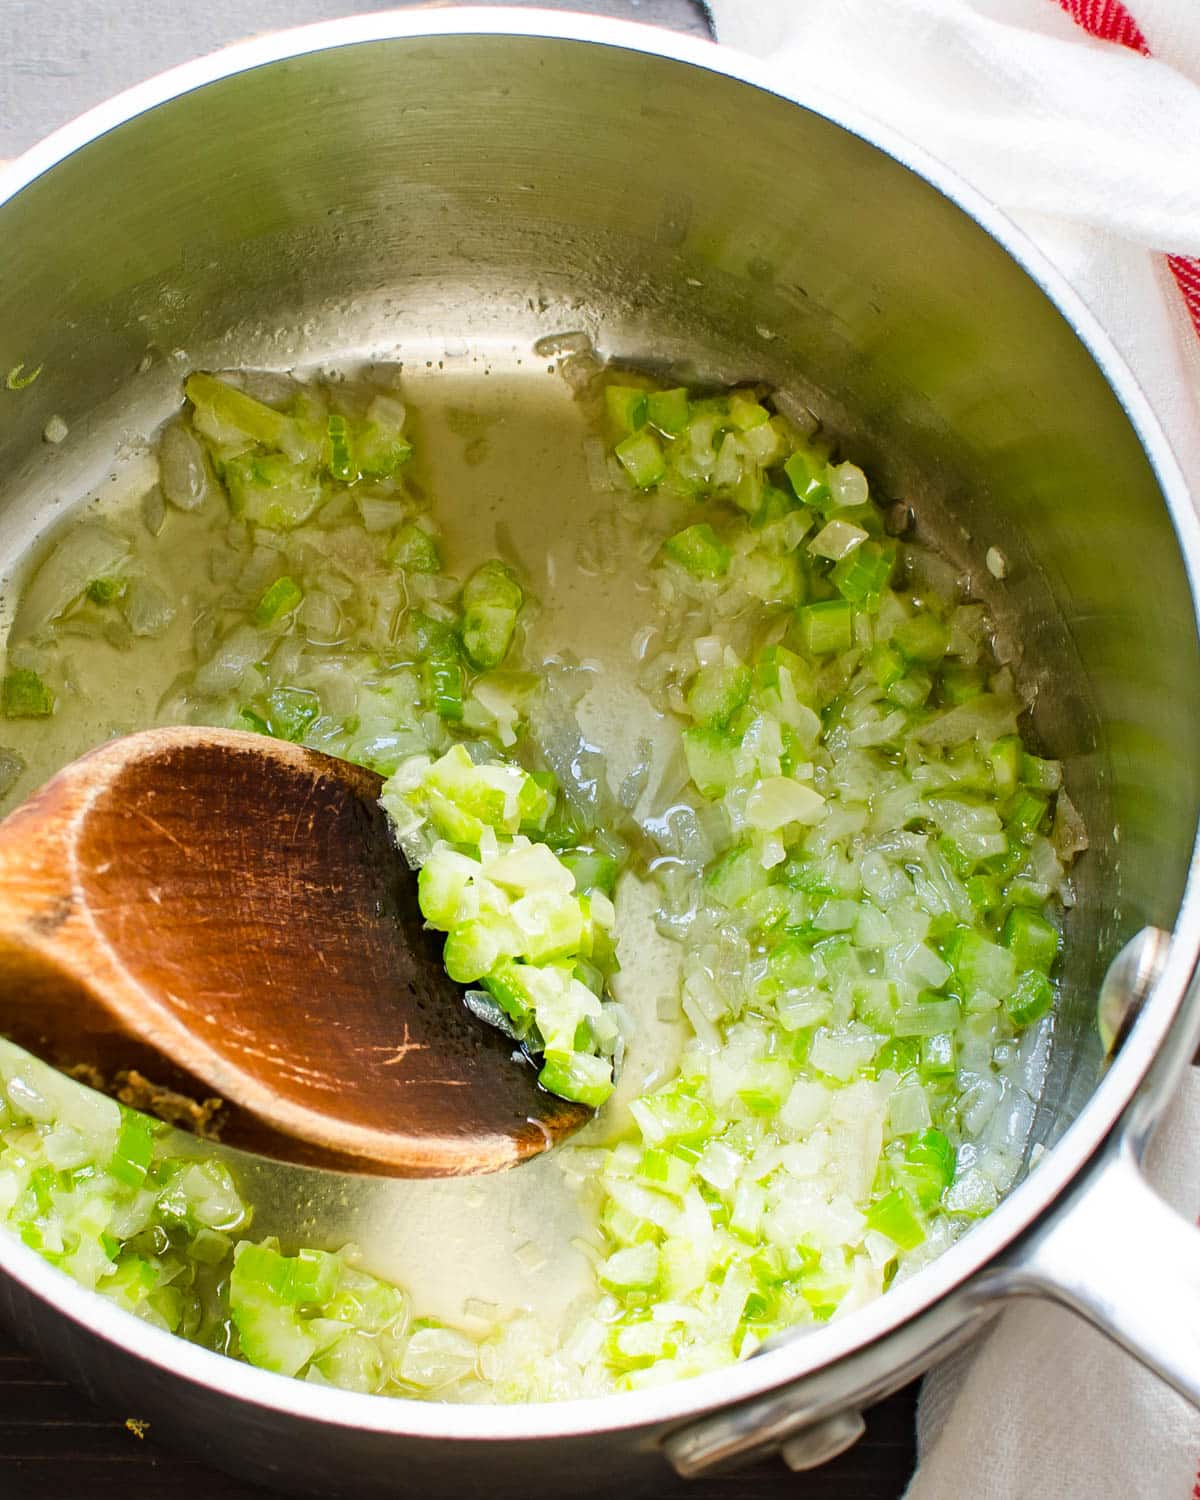 sweating onions and celery in a pot.